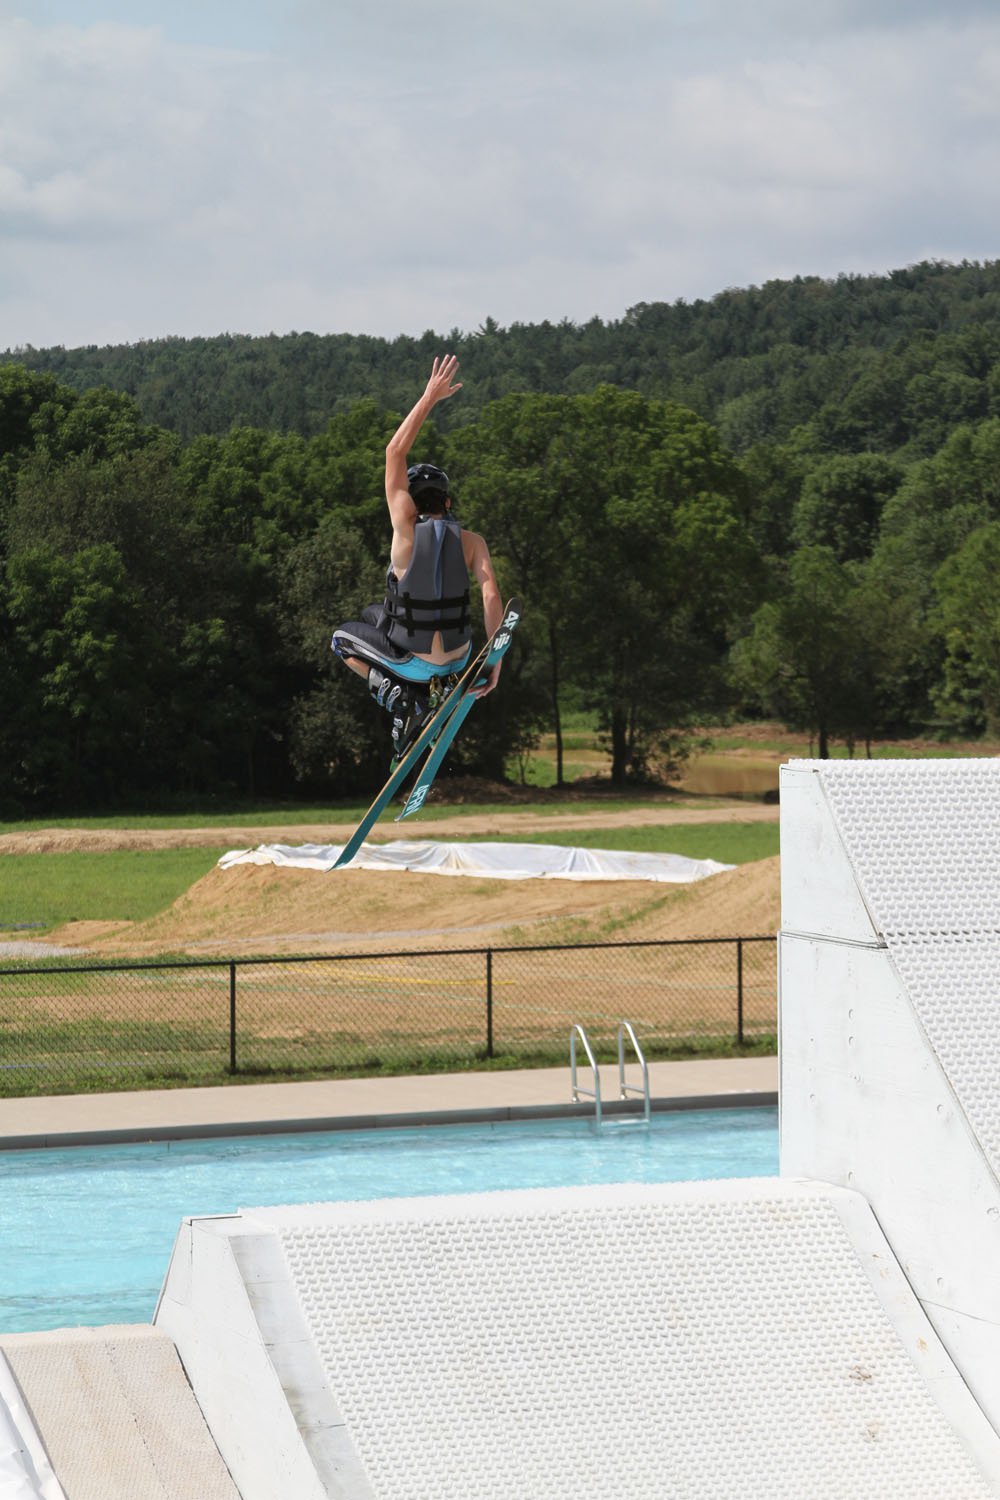 Jesse Via on the water jumps